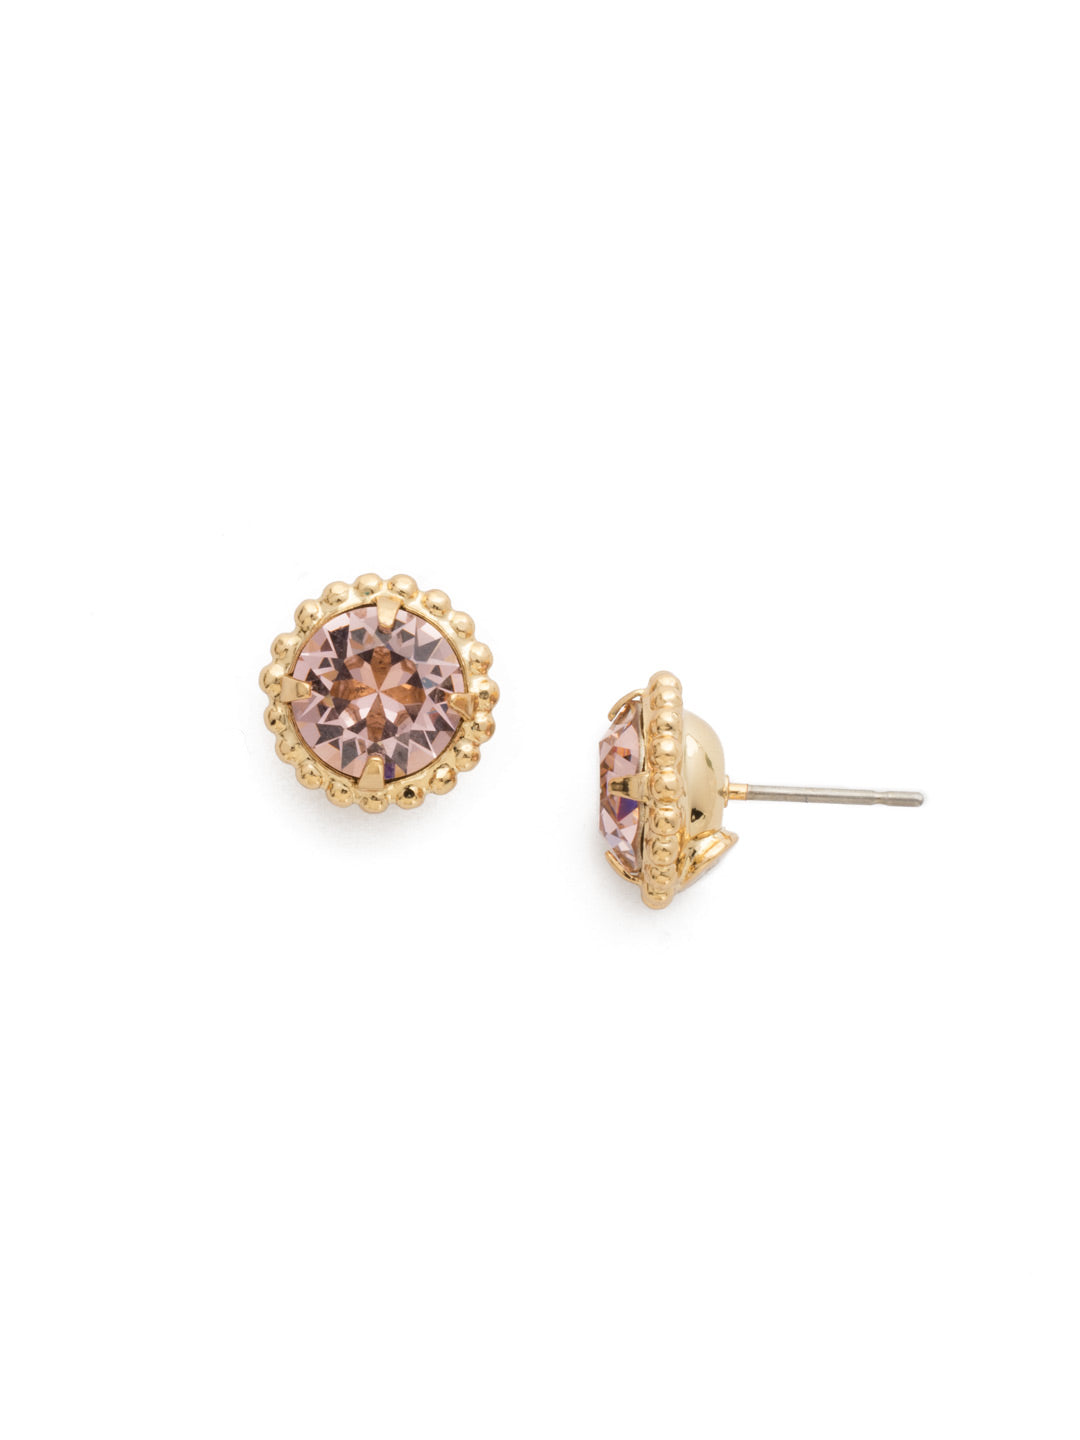 Simplicity Stud Earrings - EBY38BGVIN - <p>A timeless classic, the Simplicity Stud Earrings feature round cut crystals in a variety of colors; accented with a halo of metal beaded detail. Need help picking a stud? <a href="https://www.sorrelli.com/blogs/sisterhood/round-stud-earrings-101-a-rundown-of-sizes-styles-and-sparkle">Check out our size guide!</a> From Sorrelli's Vintage Rose collection in our Bright Gold-tone finish.</p>